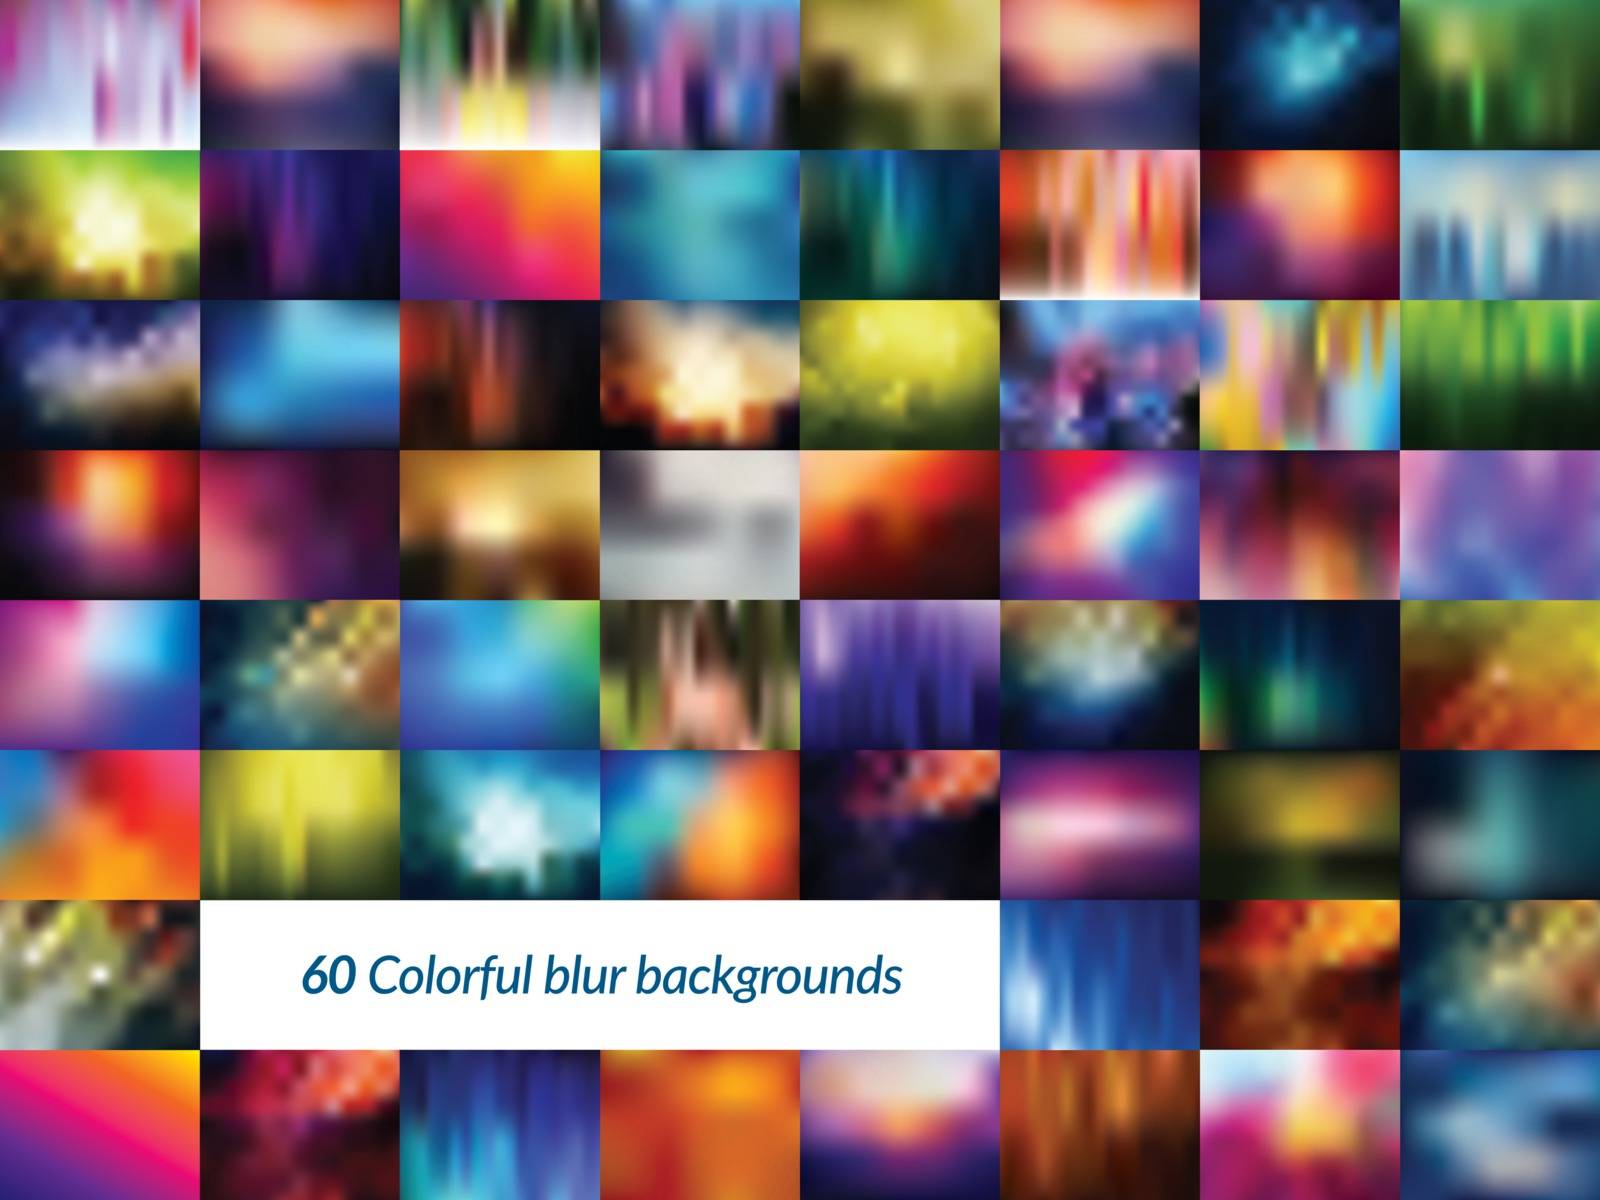 Backgrounds blurred colorful by cifotart